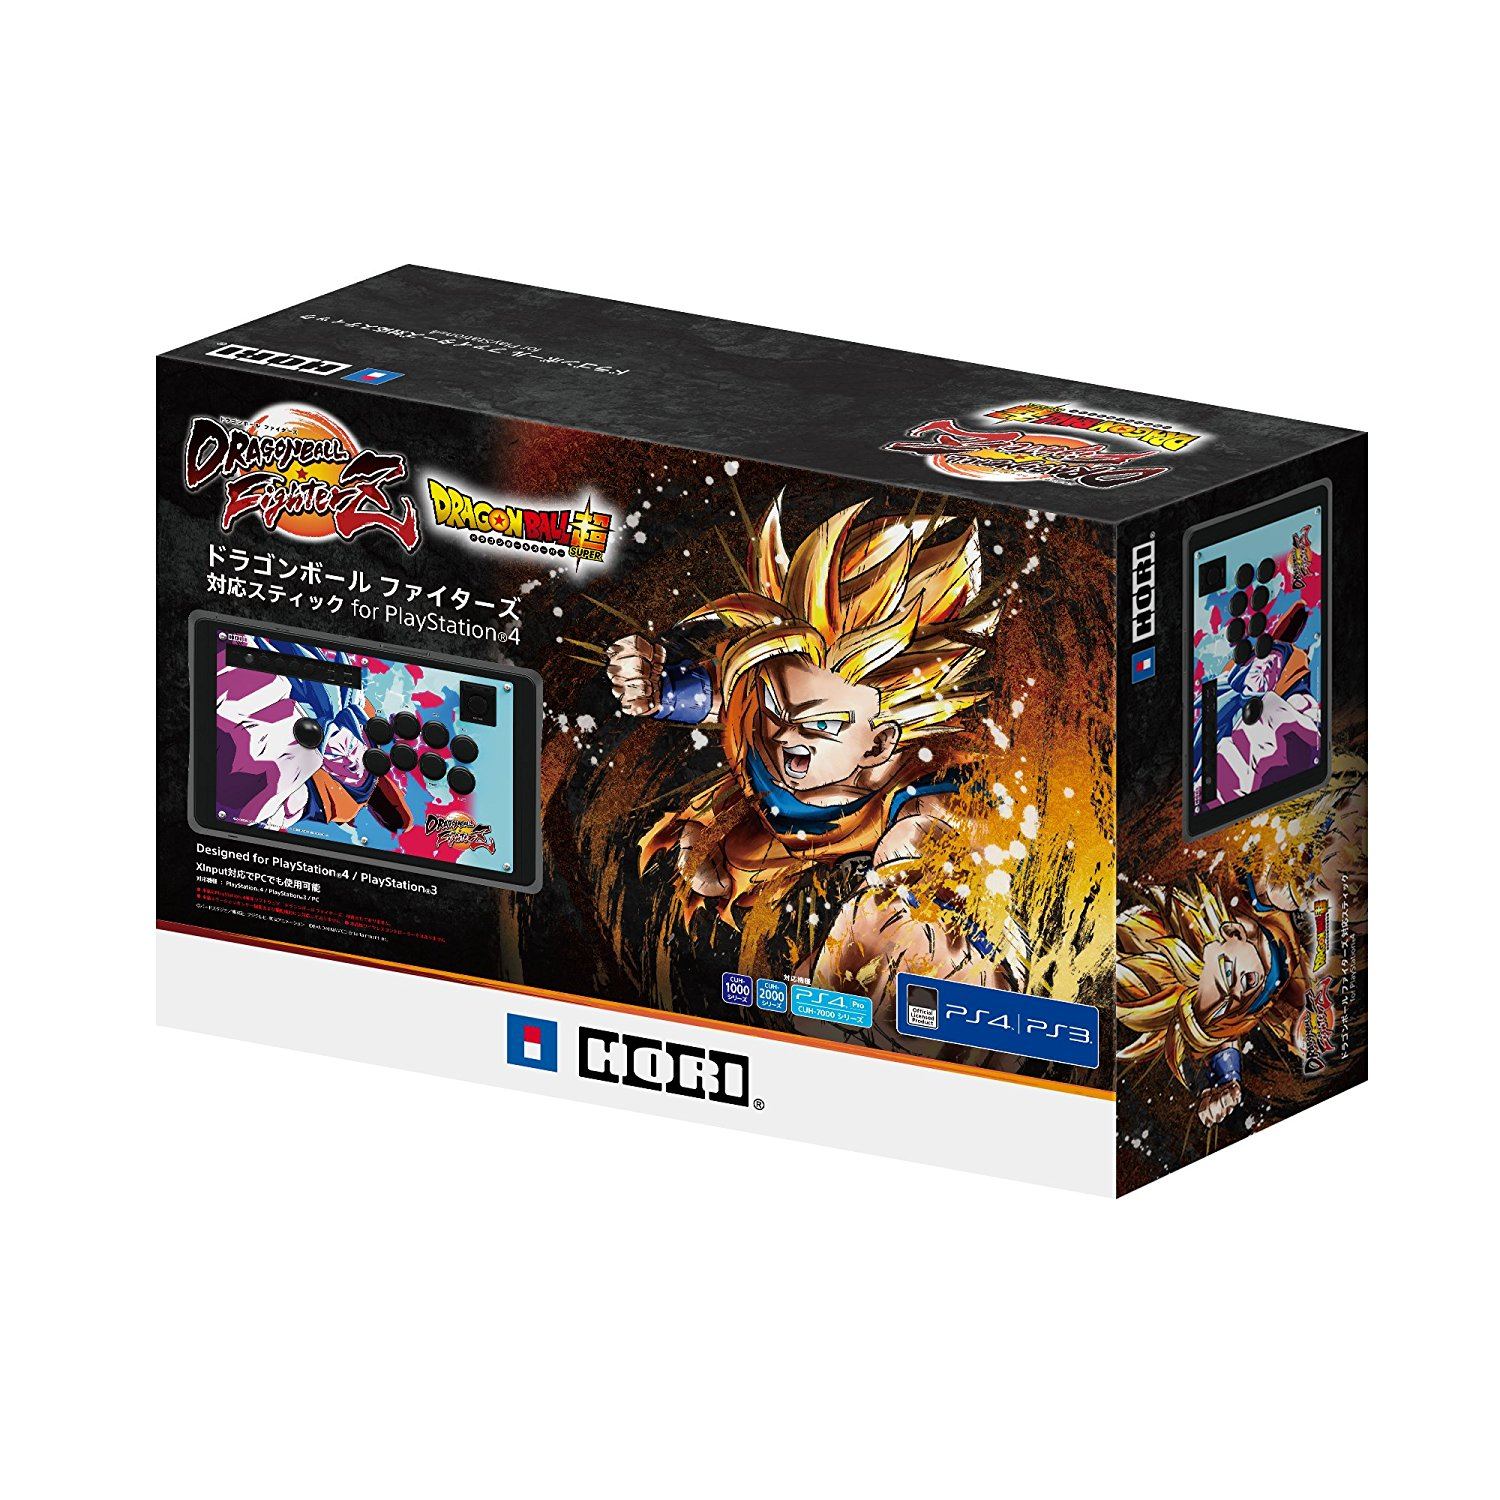 Credencial Evento personal Dragon Ball FighterZ Arcade Stick for PlayStation 4 for Windows,  PlayStation 3, PlayStation 4